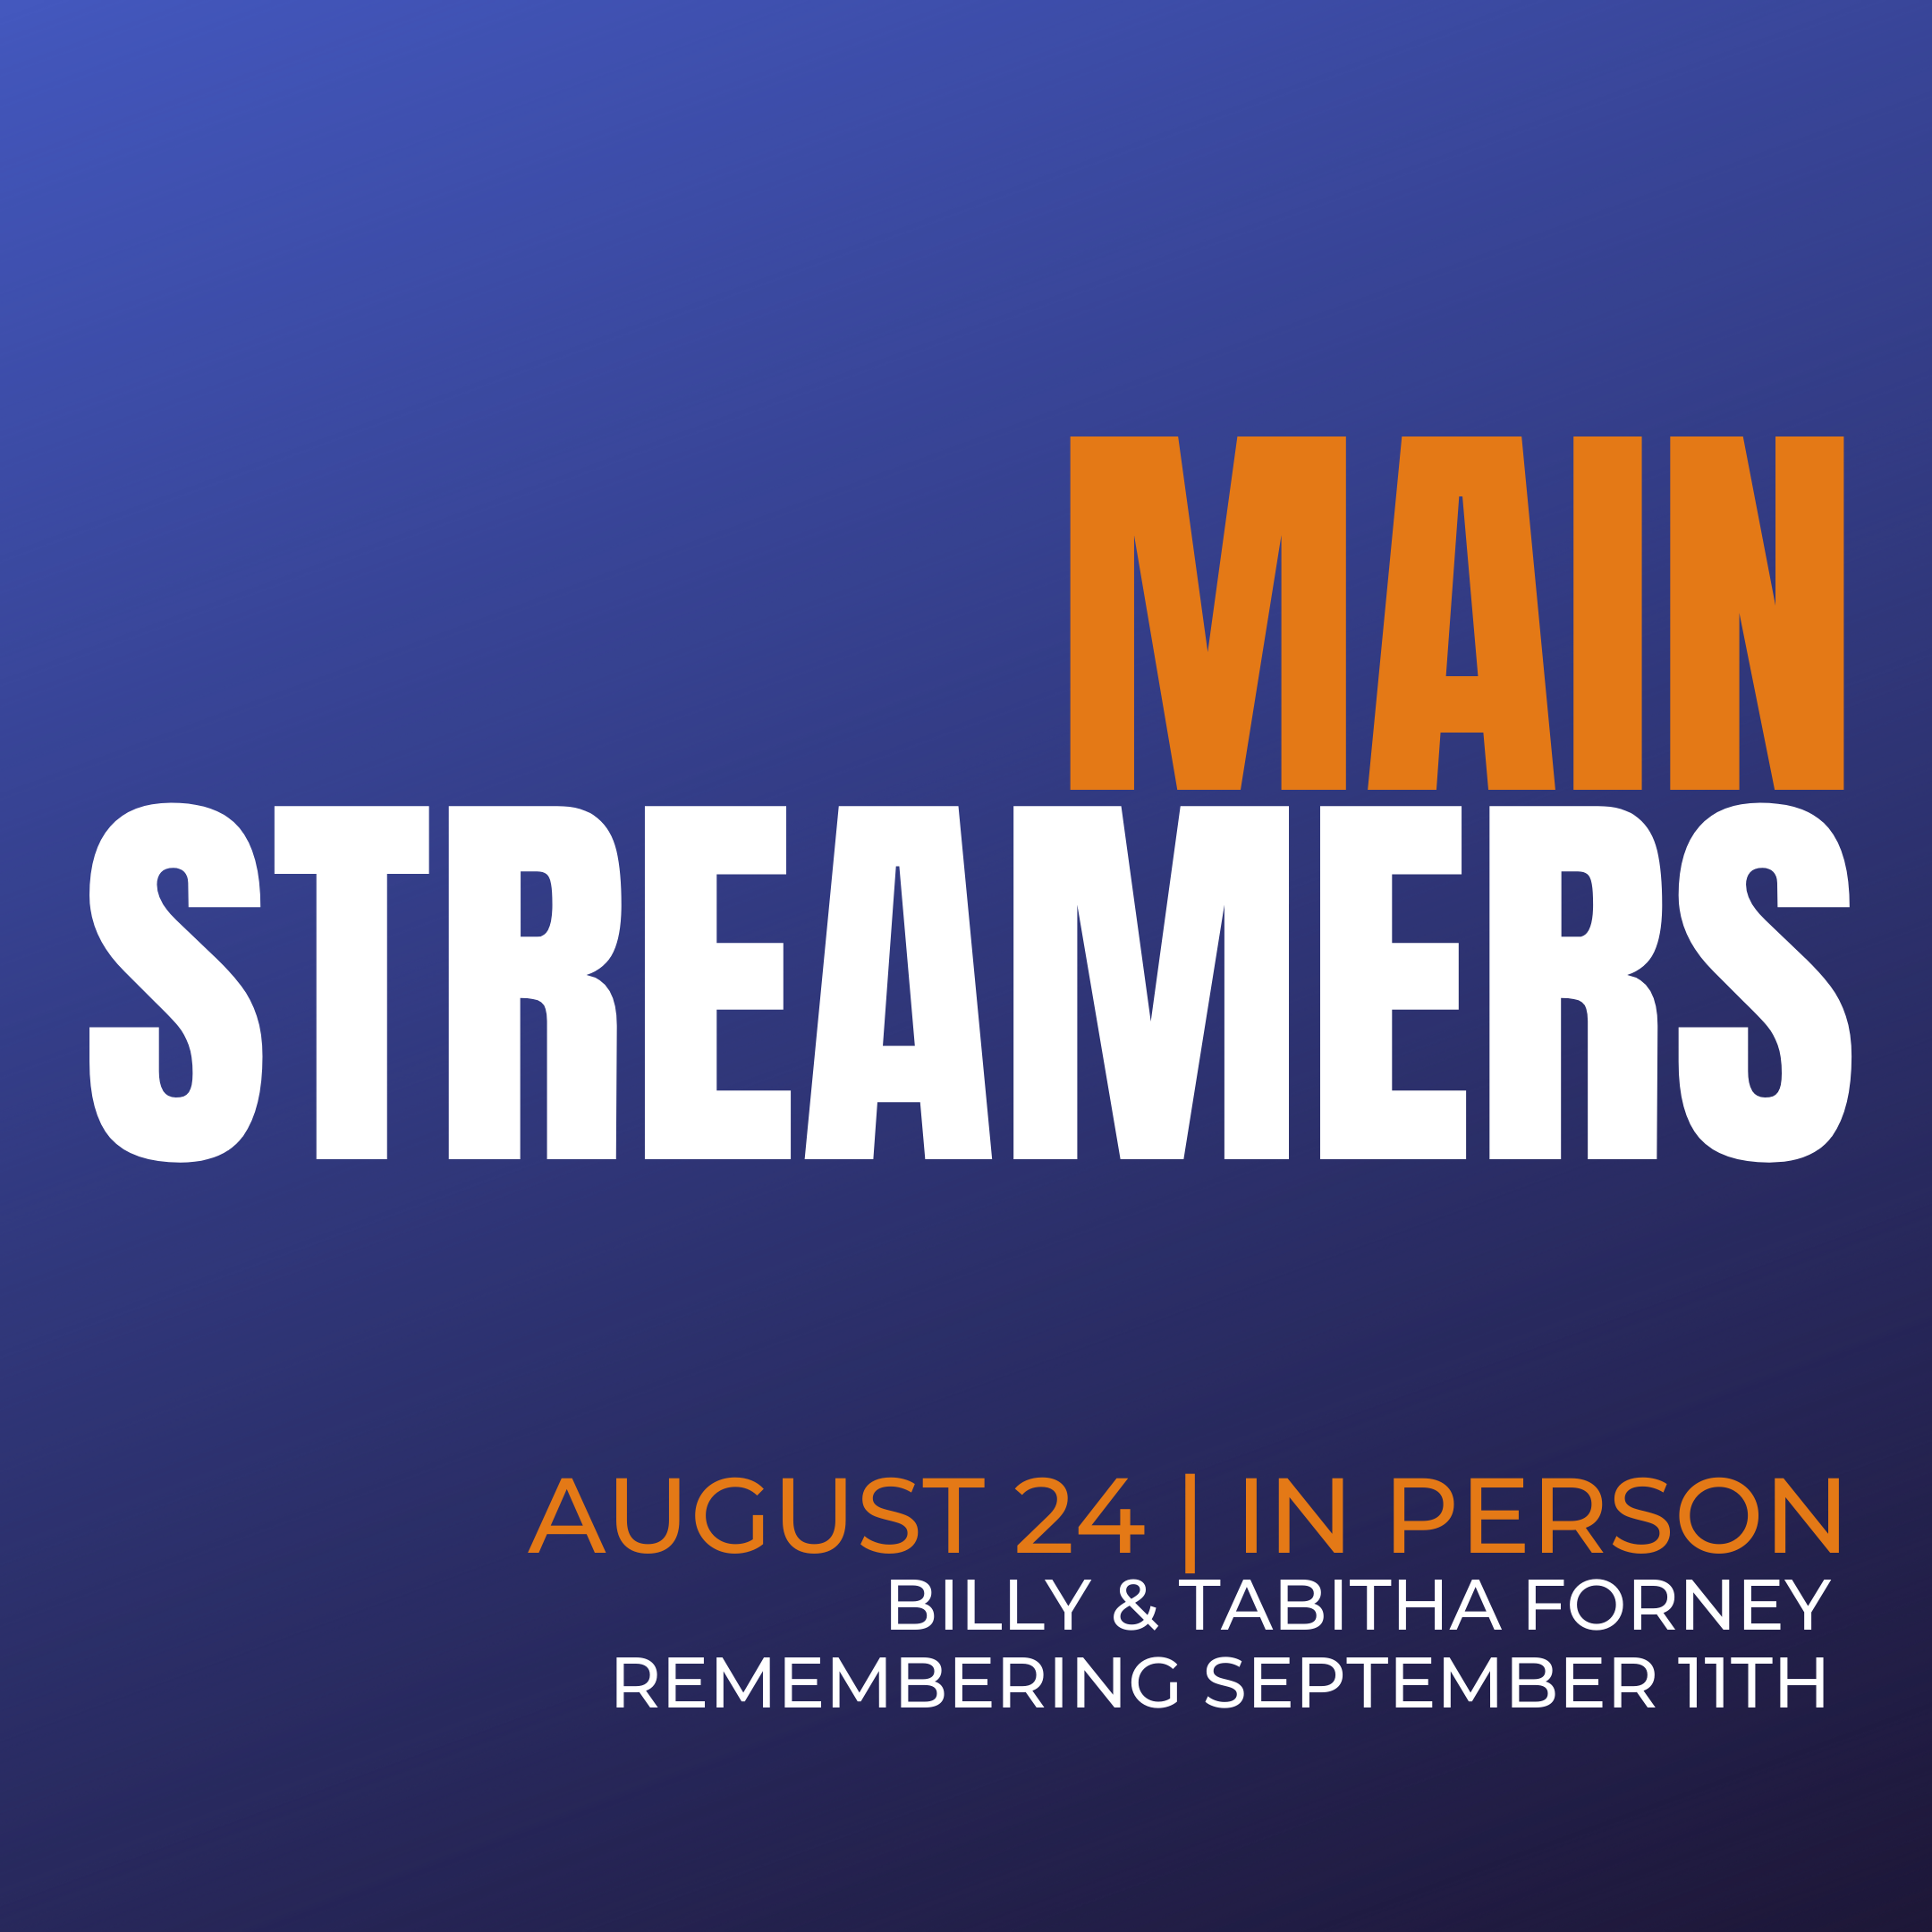 MainStreamers: Remembering September 11th with Billy & Tabitha Forney